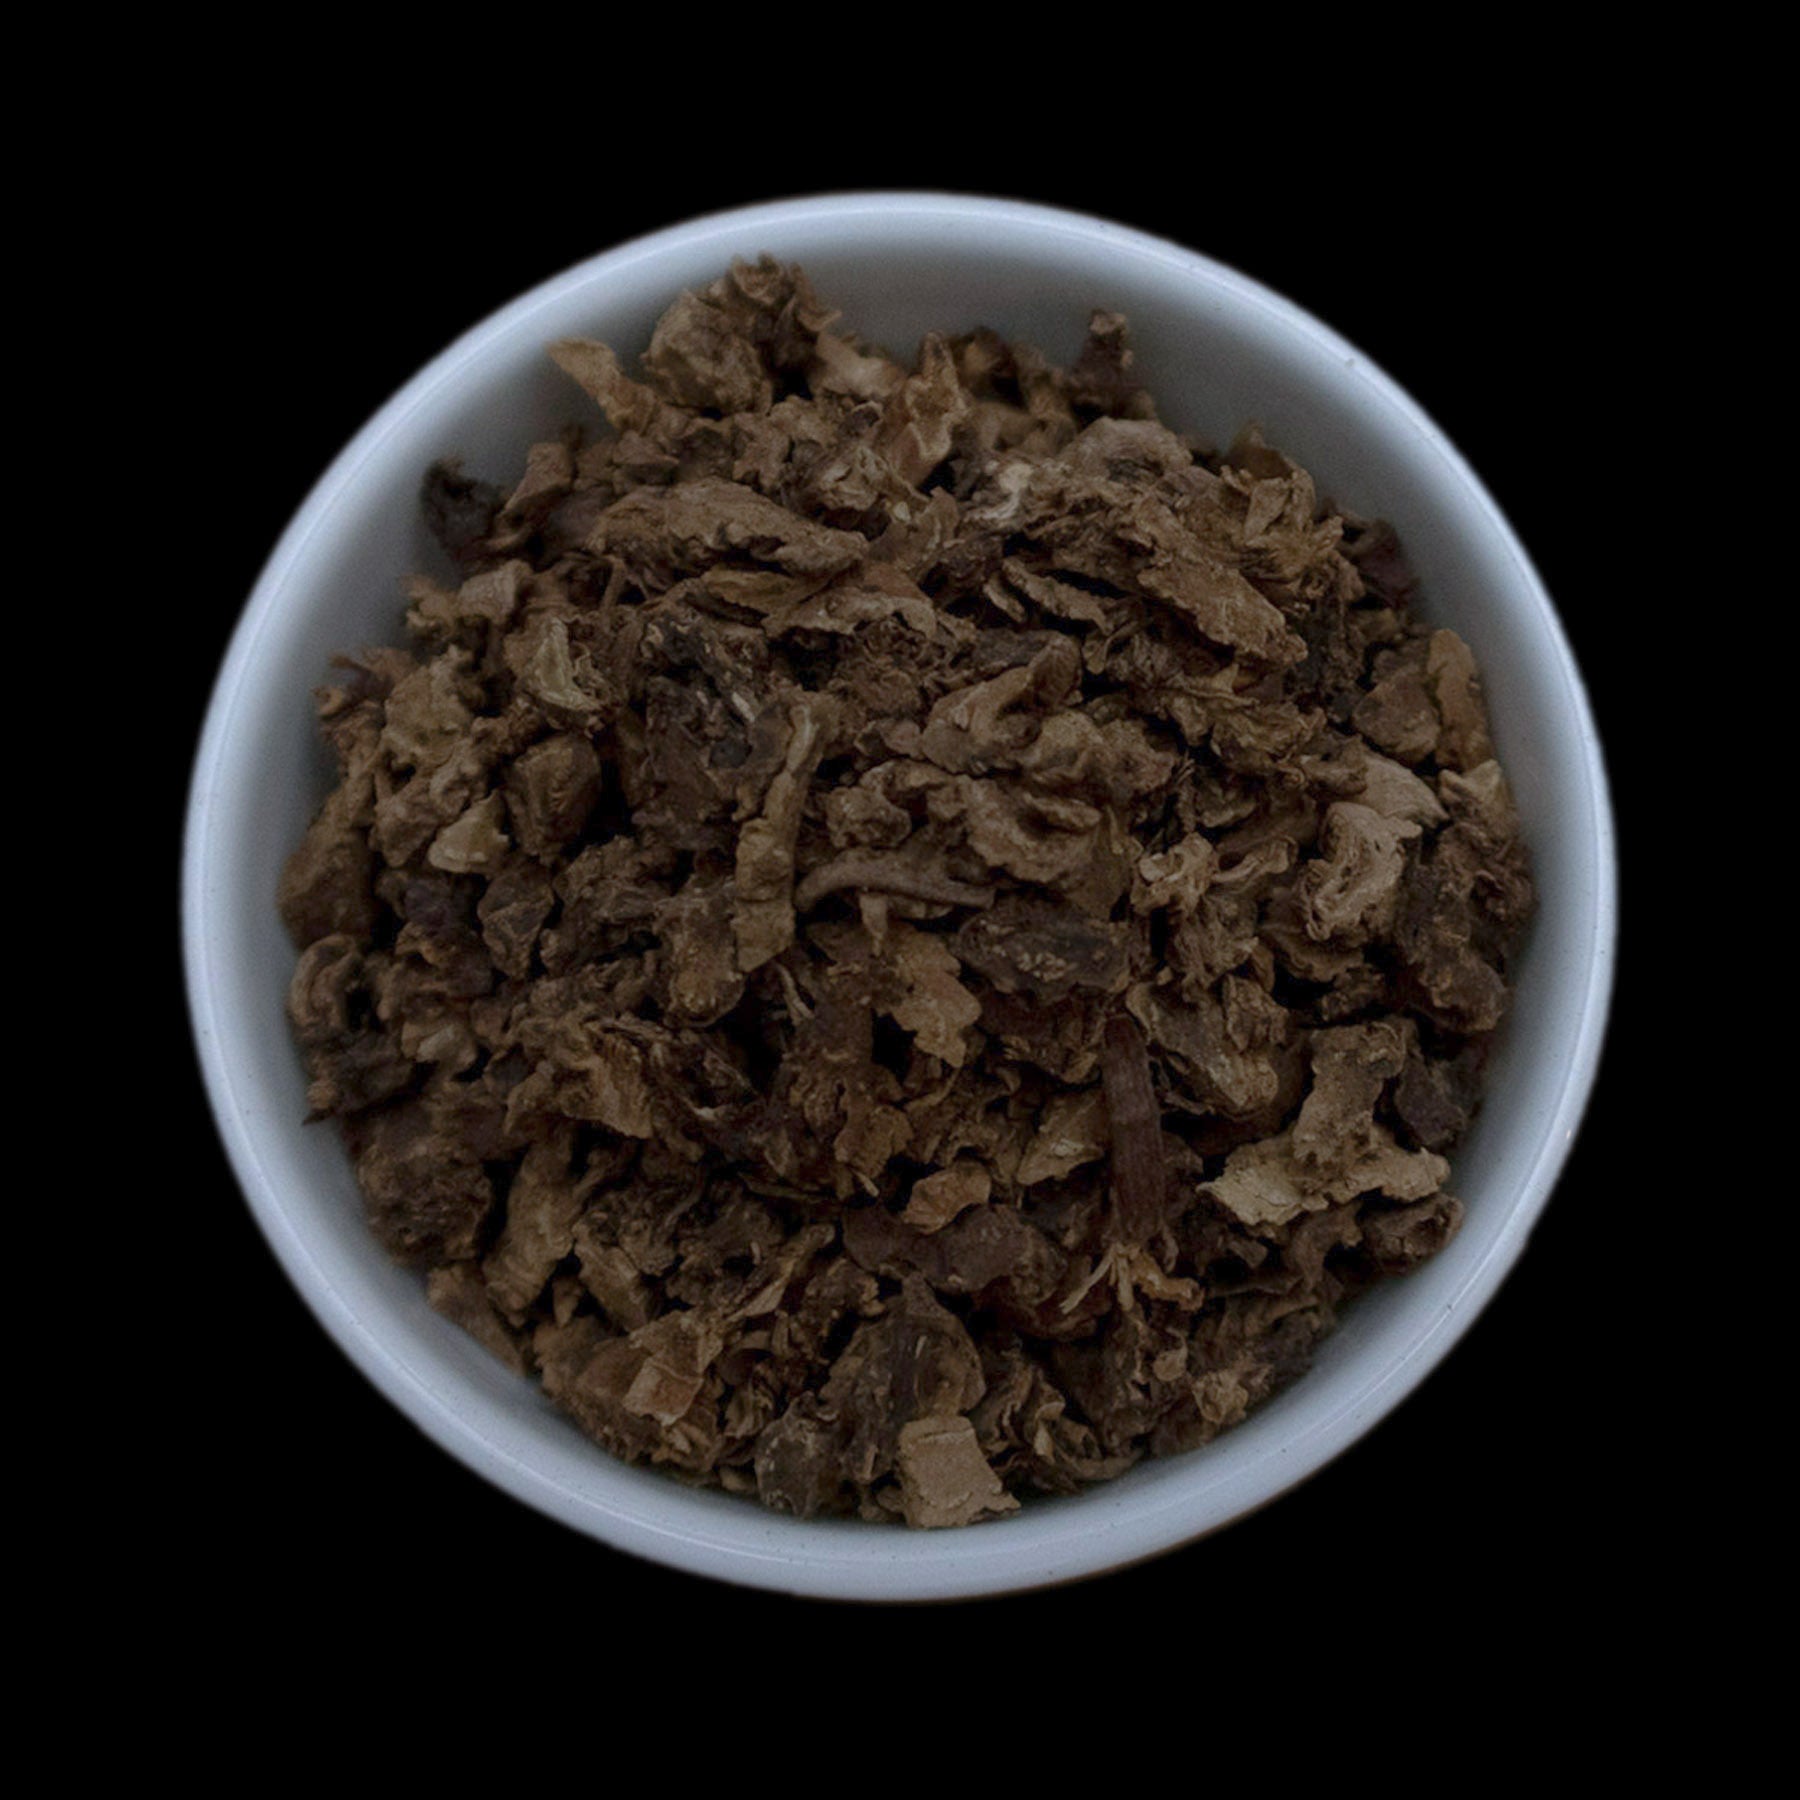 finely-chopped valerian root